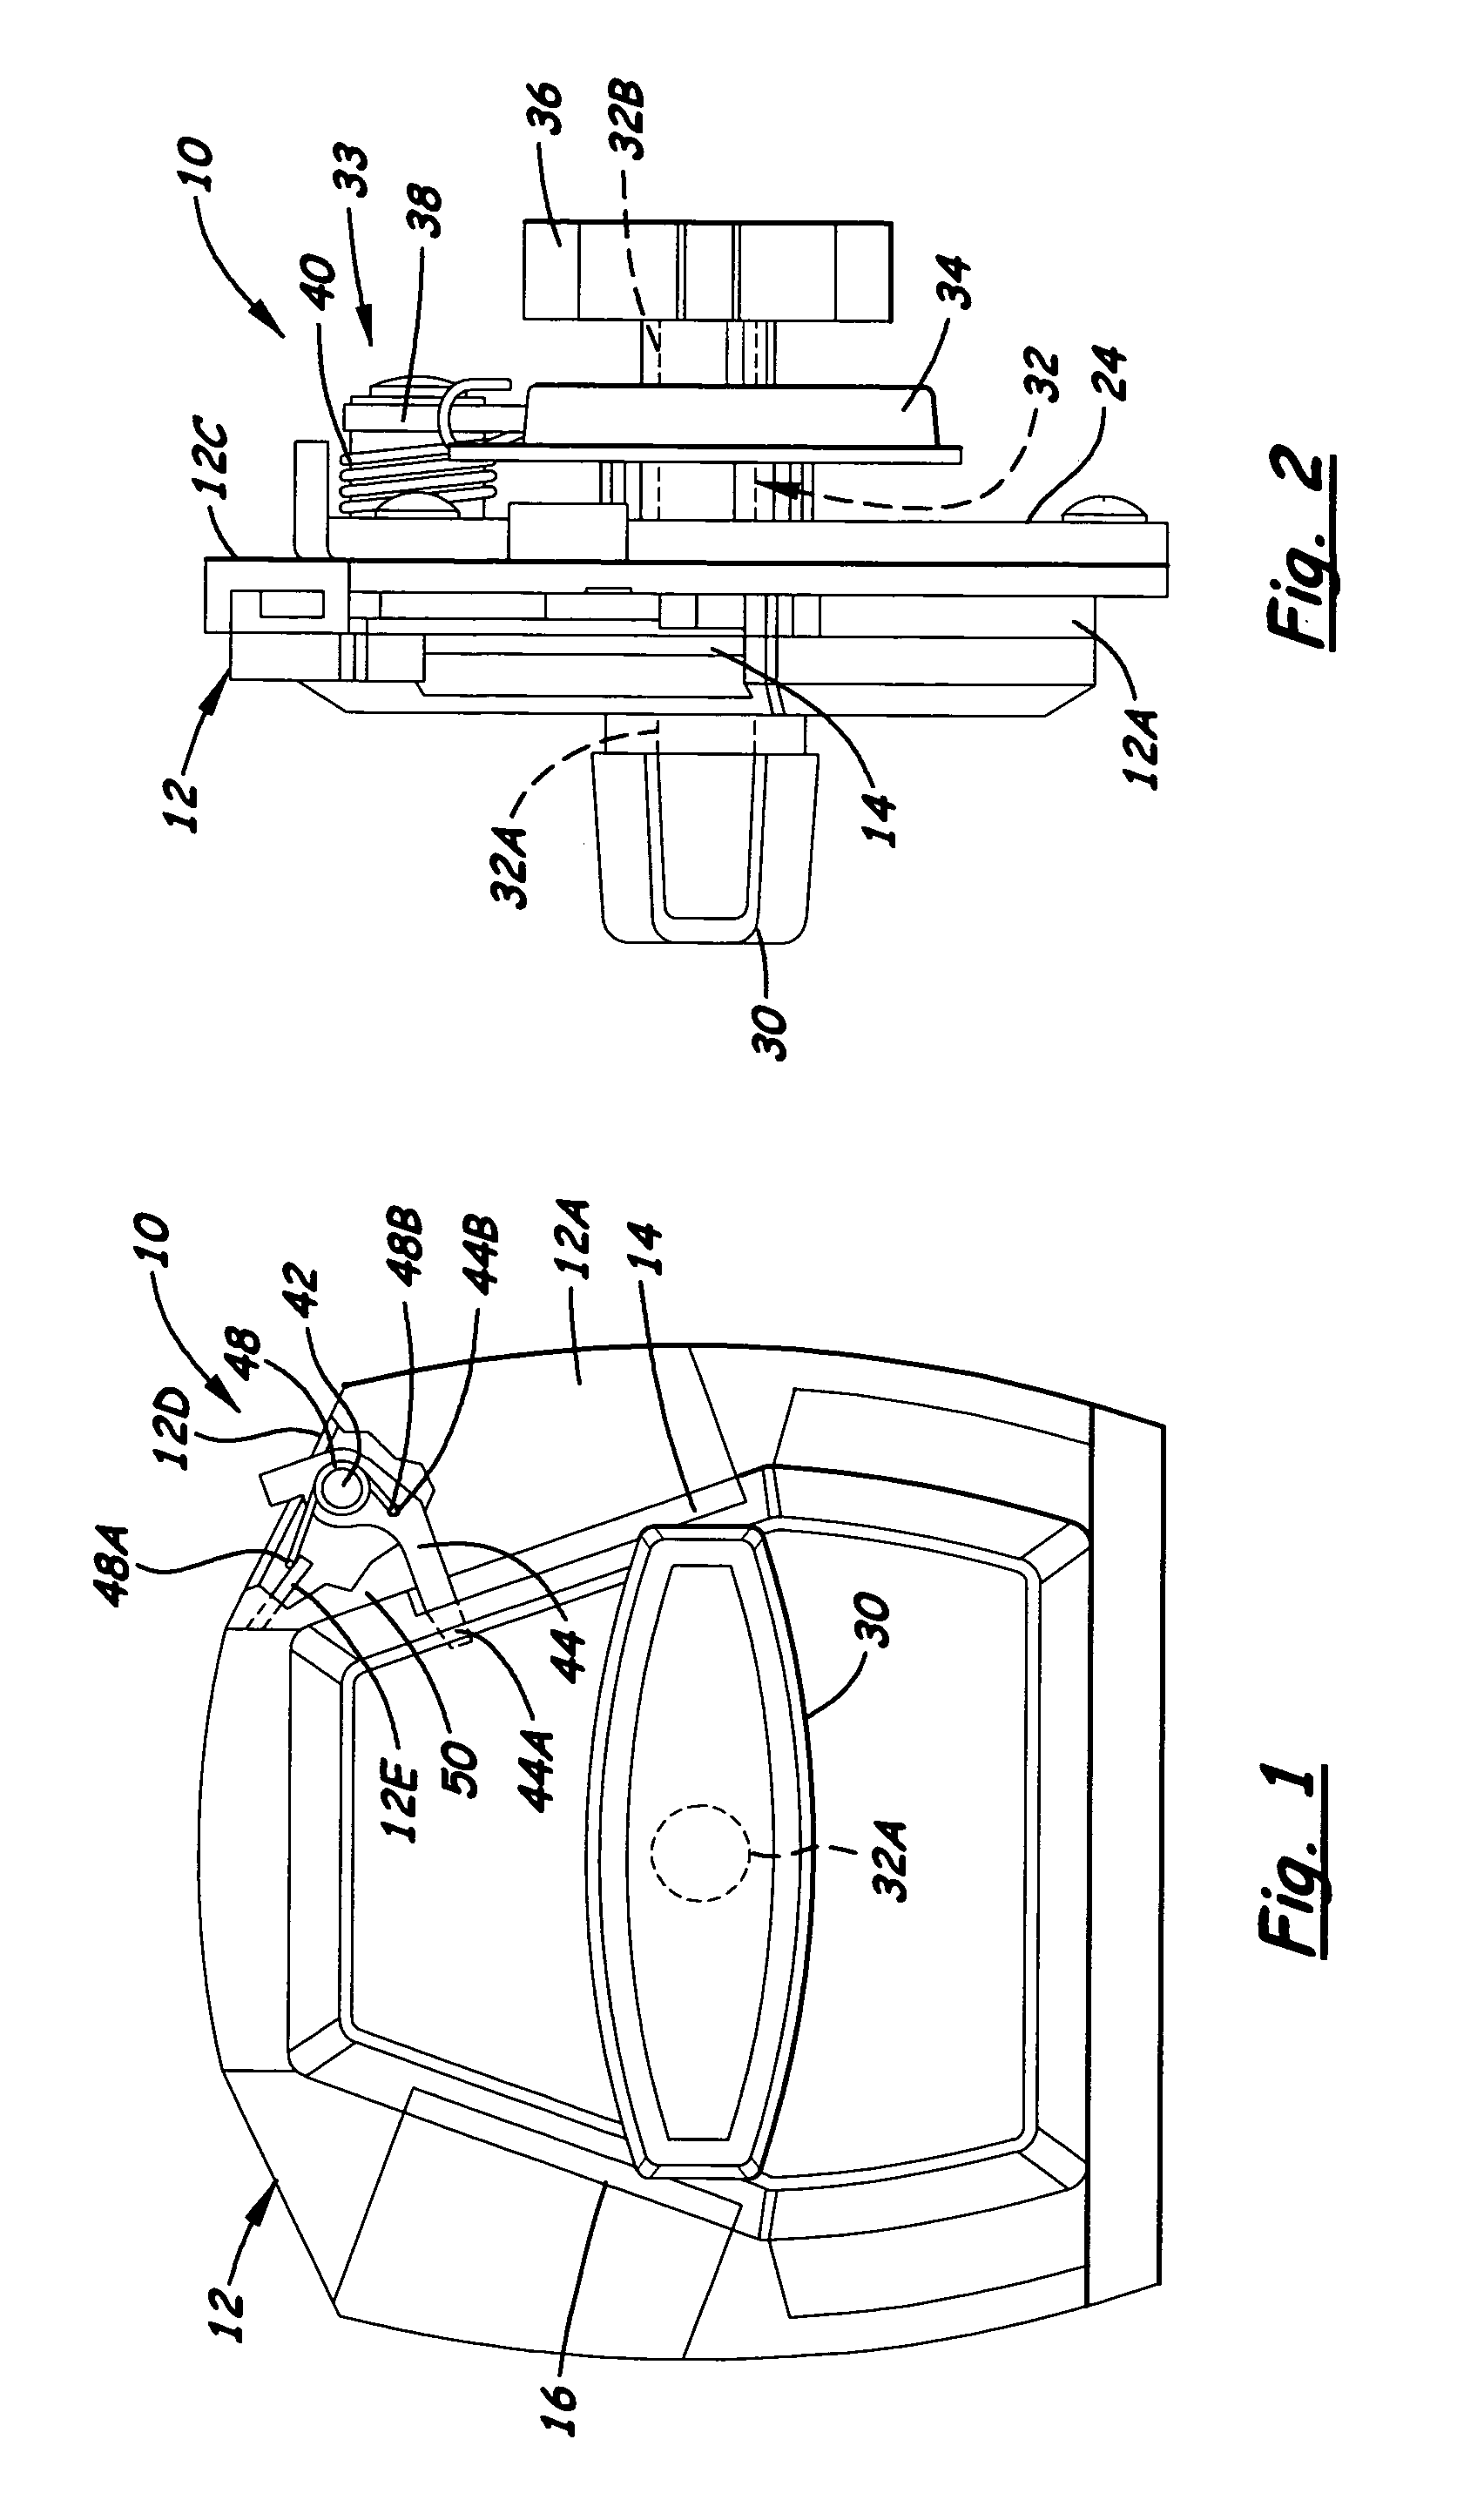 Multiple coin actuation mechanism having pivotal latch preventing coin removal from carrier wheel recess